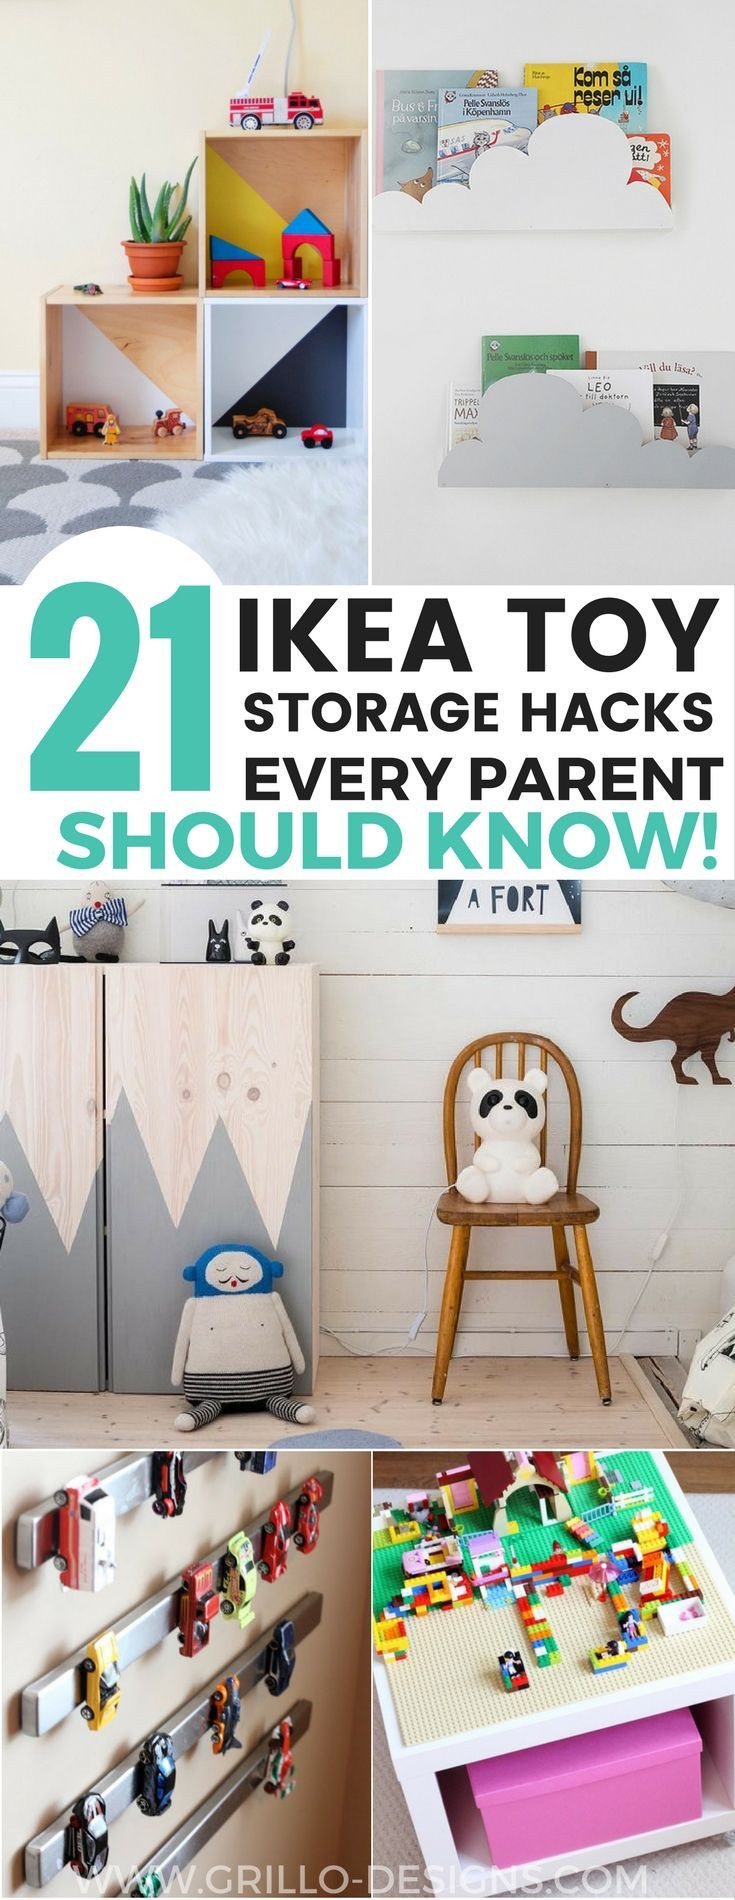 Kids Playroom Storage
 Sharing 21 awesome IKEA storage hacks for all your kids